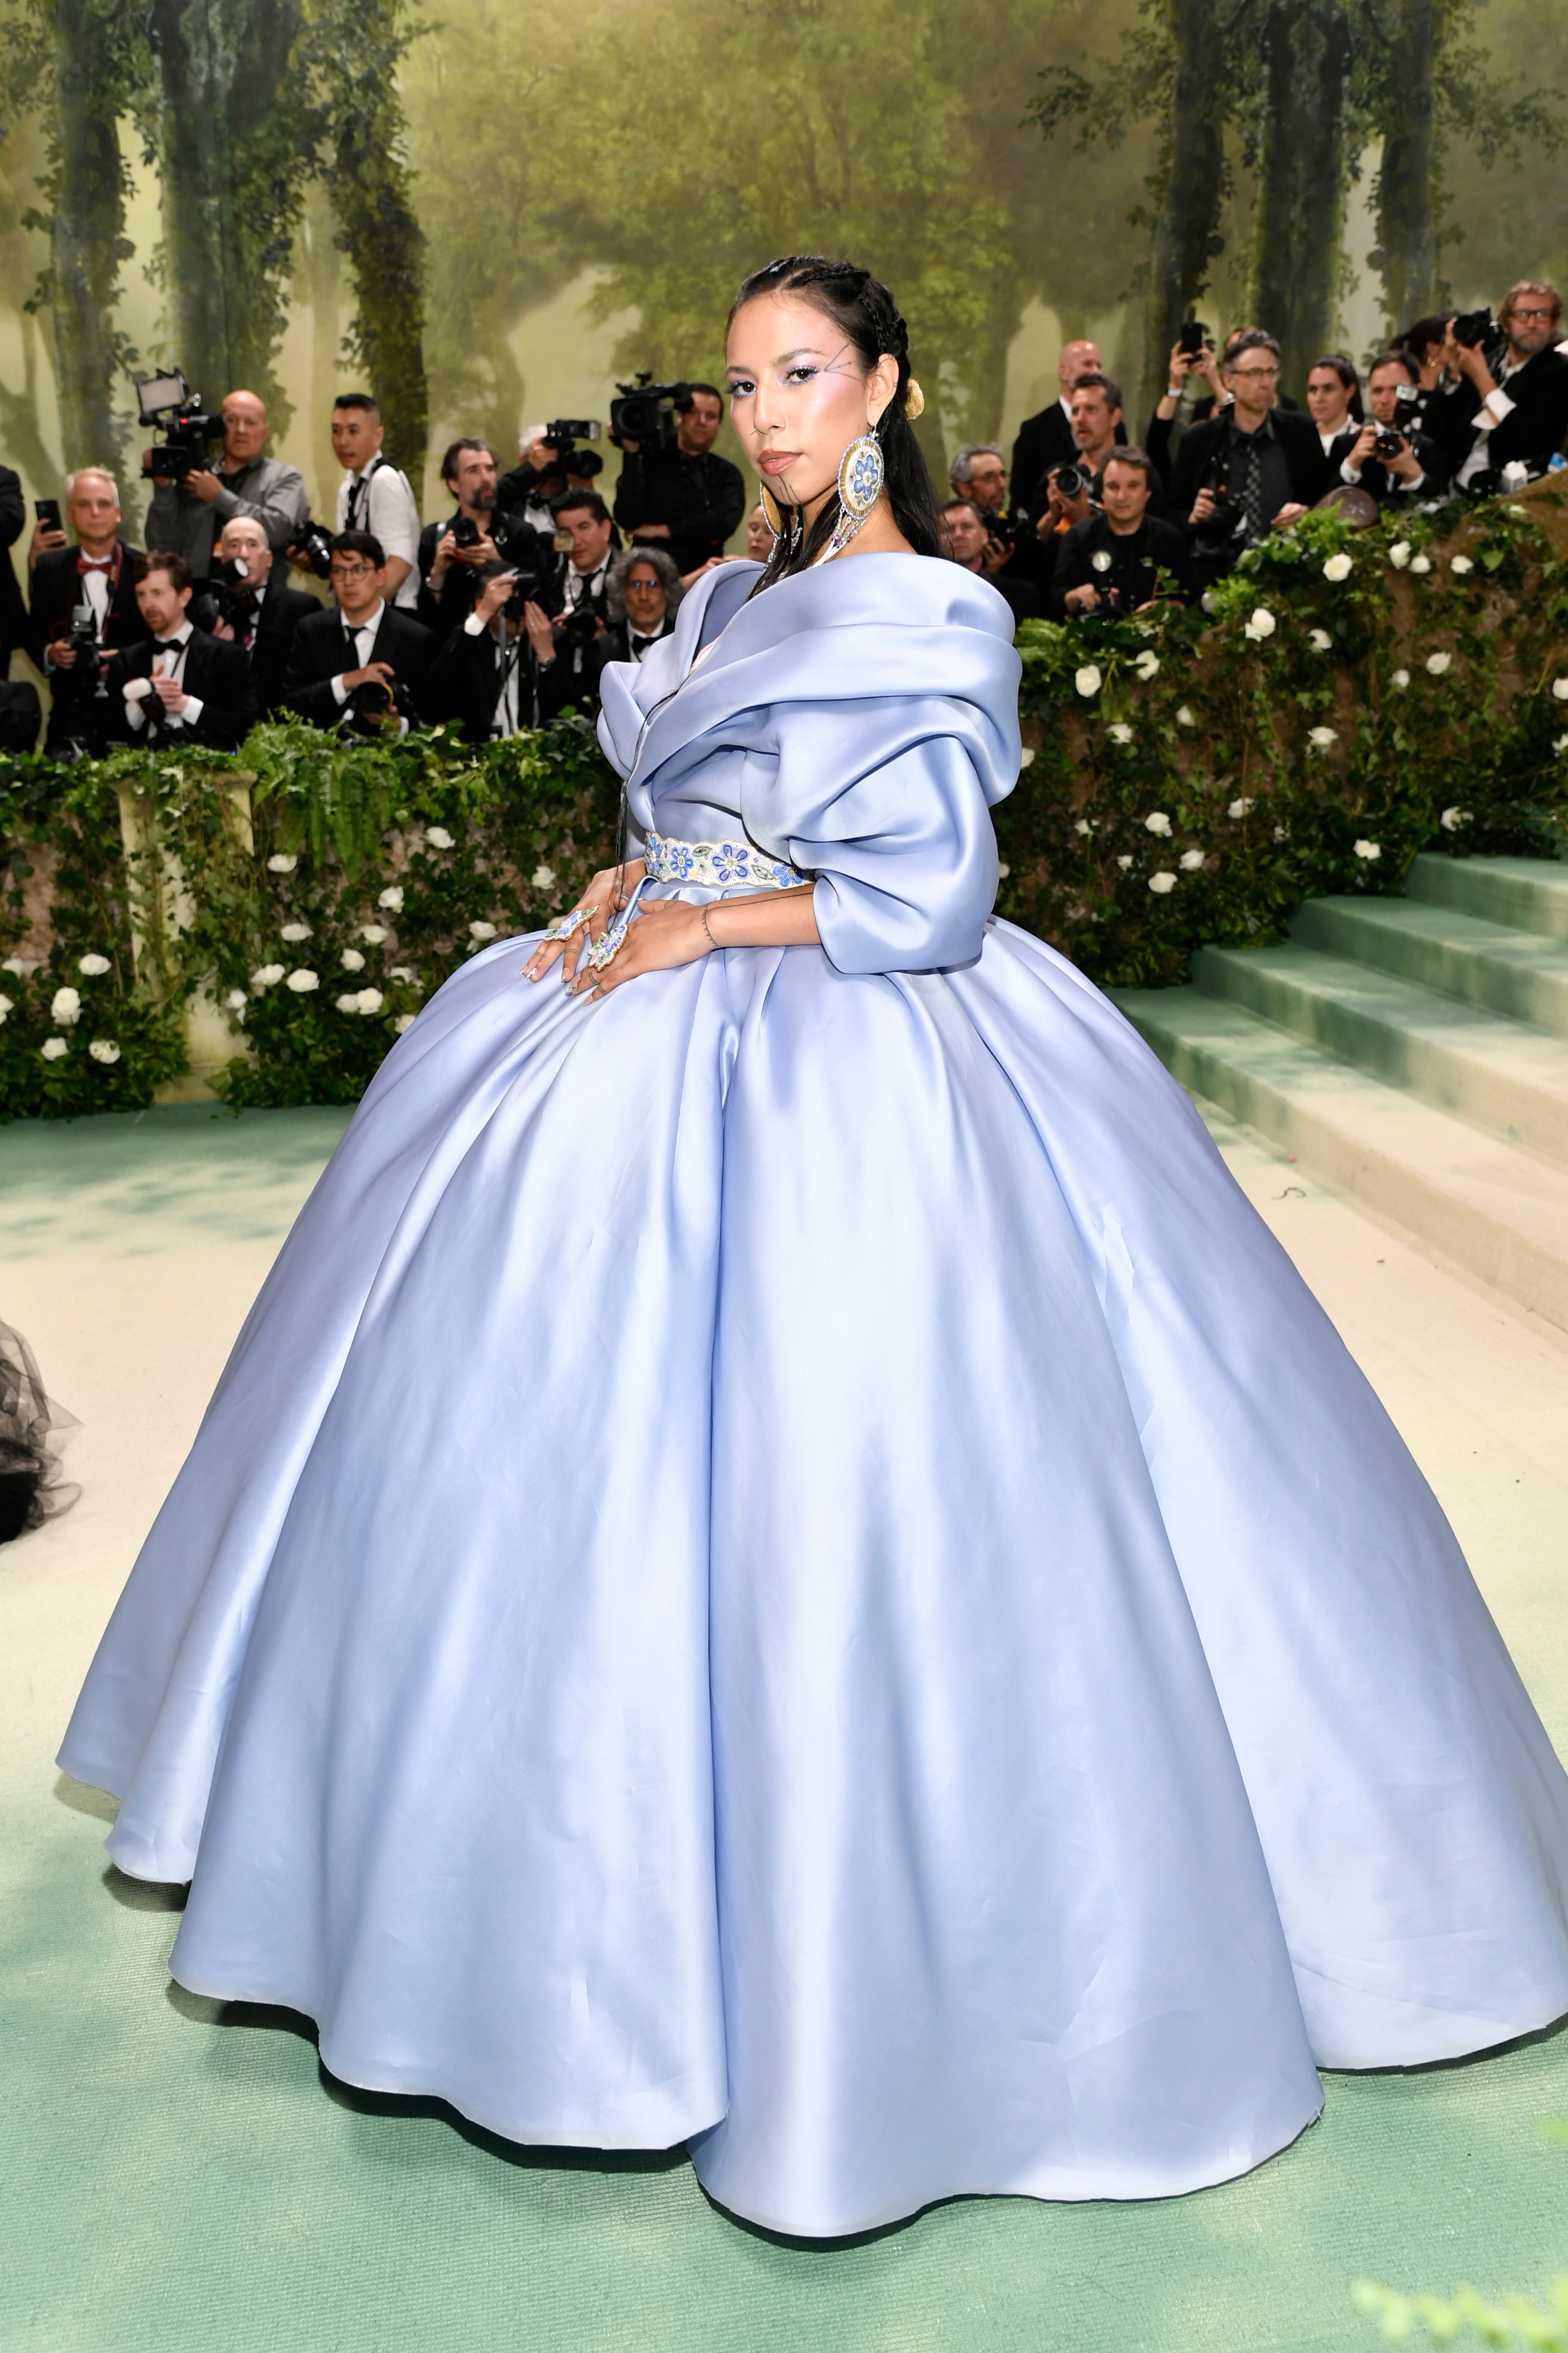 Quannah Chasinghorse wearing a big silky gown with puffy sleeves and a full skirt